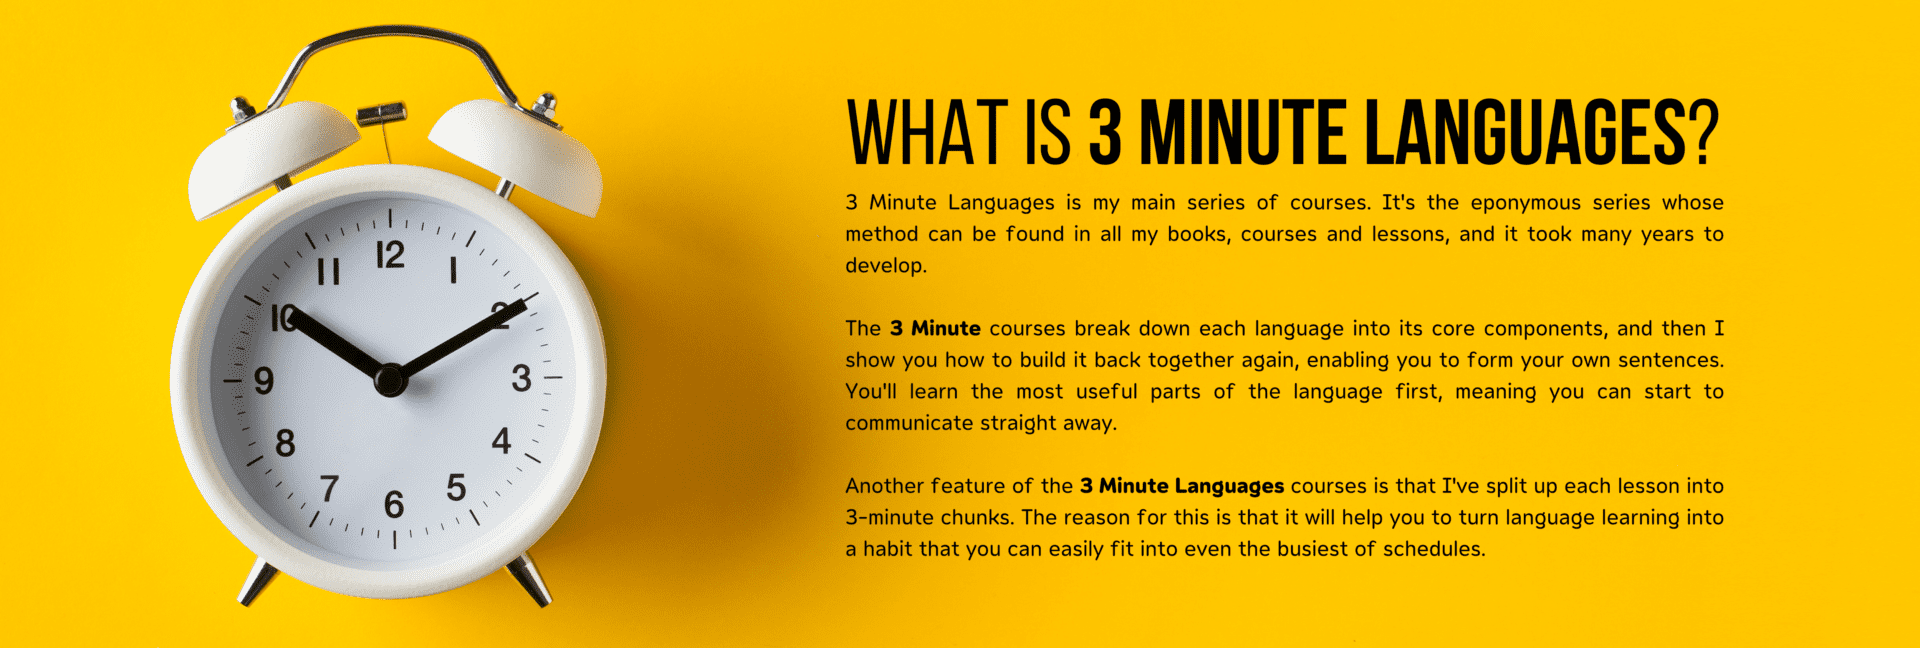 What is 3 Minute Languages?